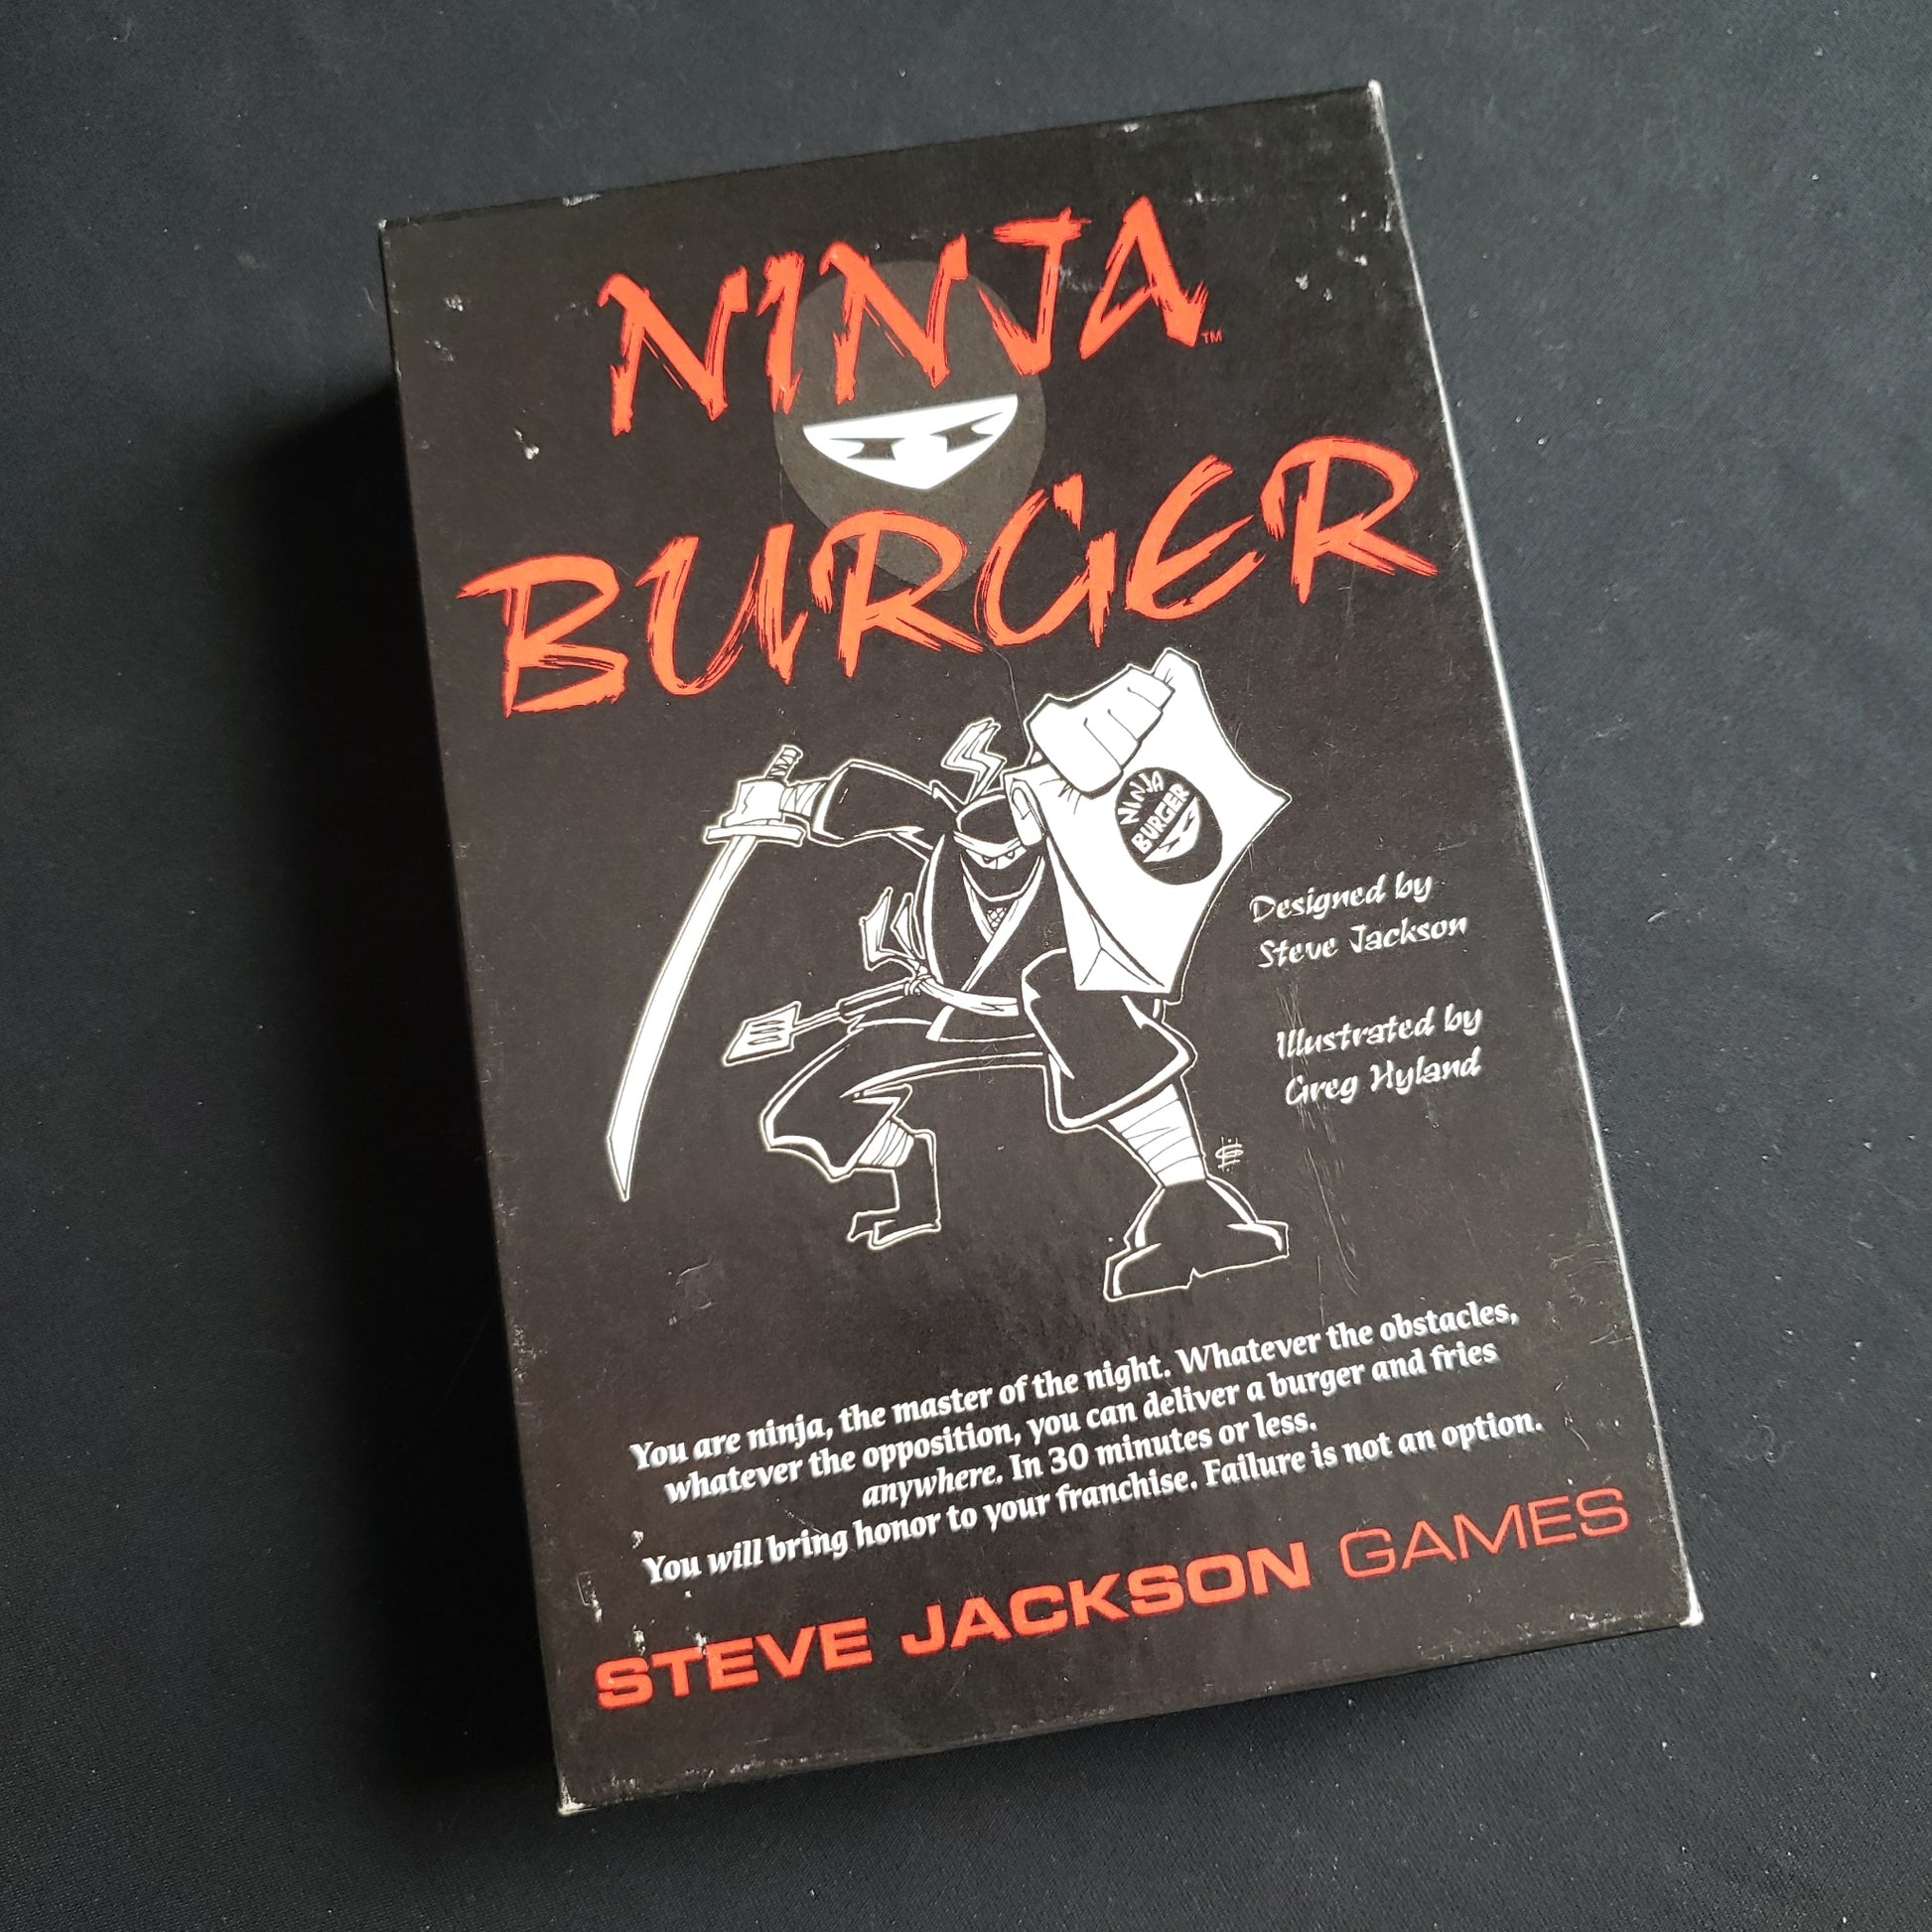 Image shows the front cover of the box of the Ninja Burger card game